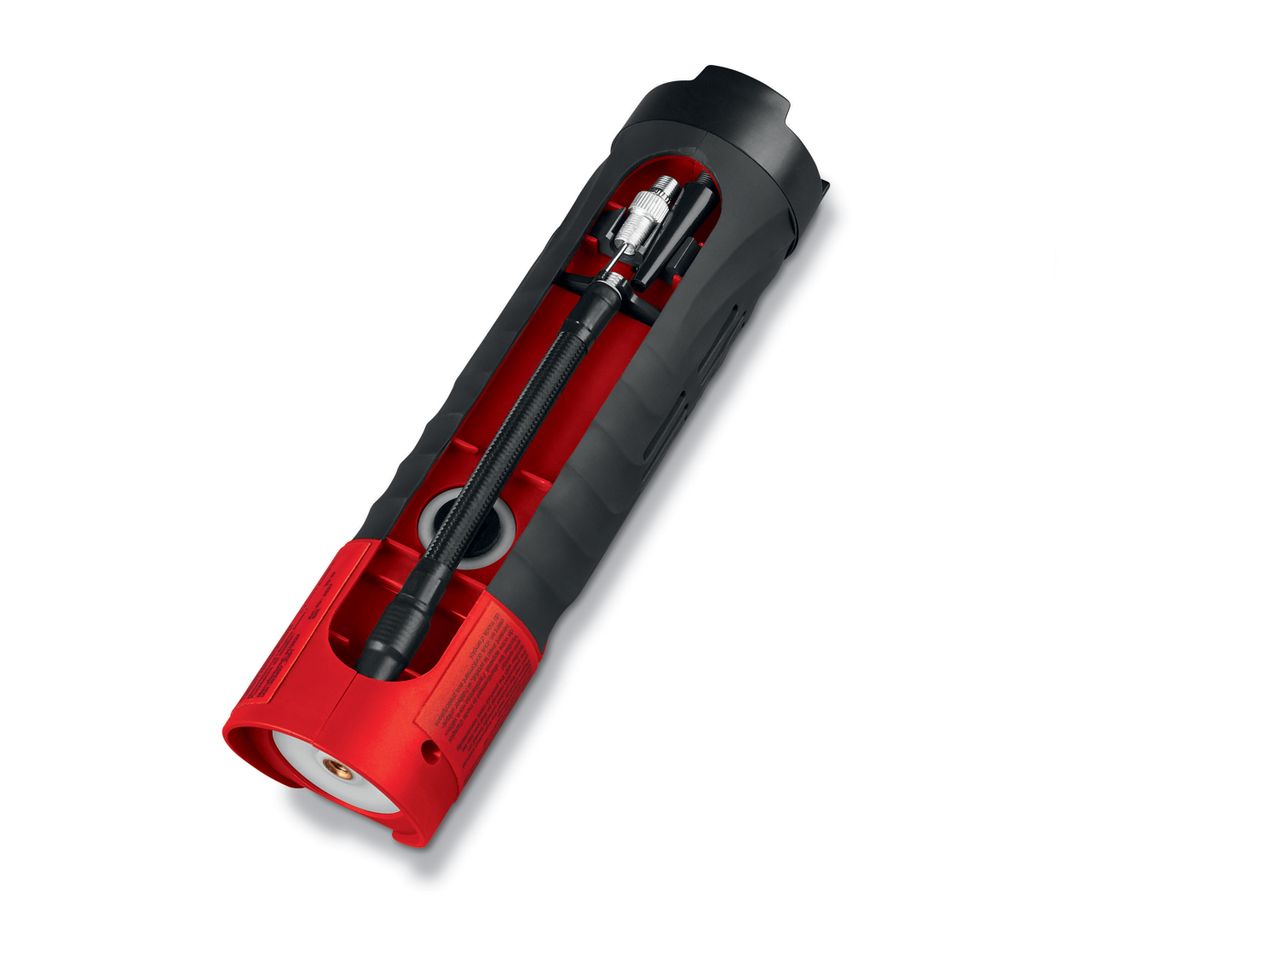 Go to full screen view: Ultimate Speed Portable Cordless Compressor - Image 2